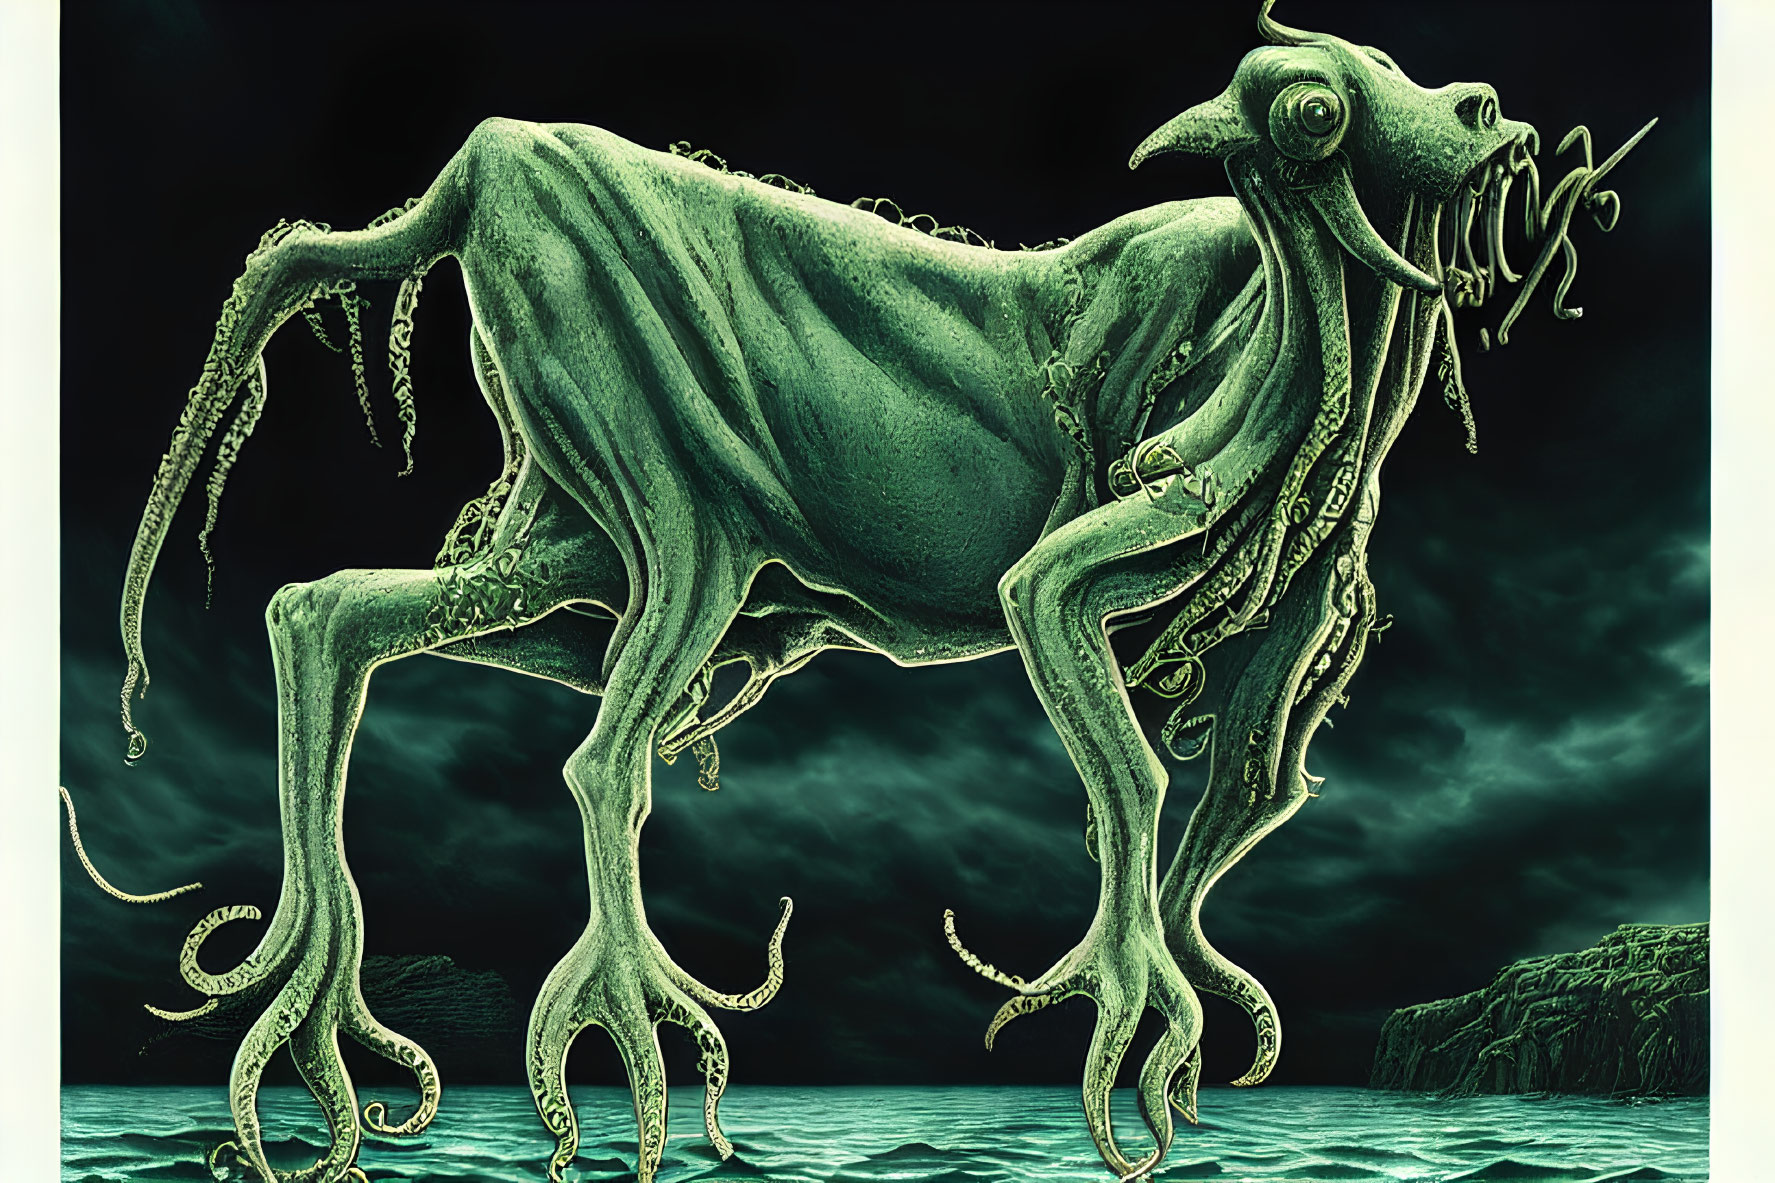 Surreal green-toned skeletal creature with tentacles in stormy seascape